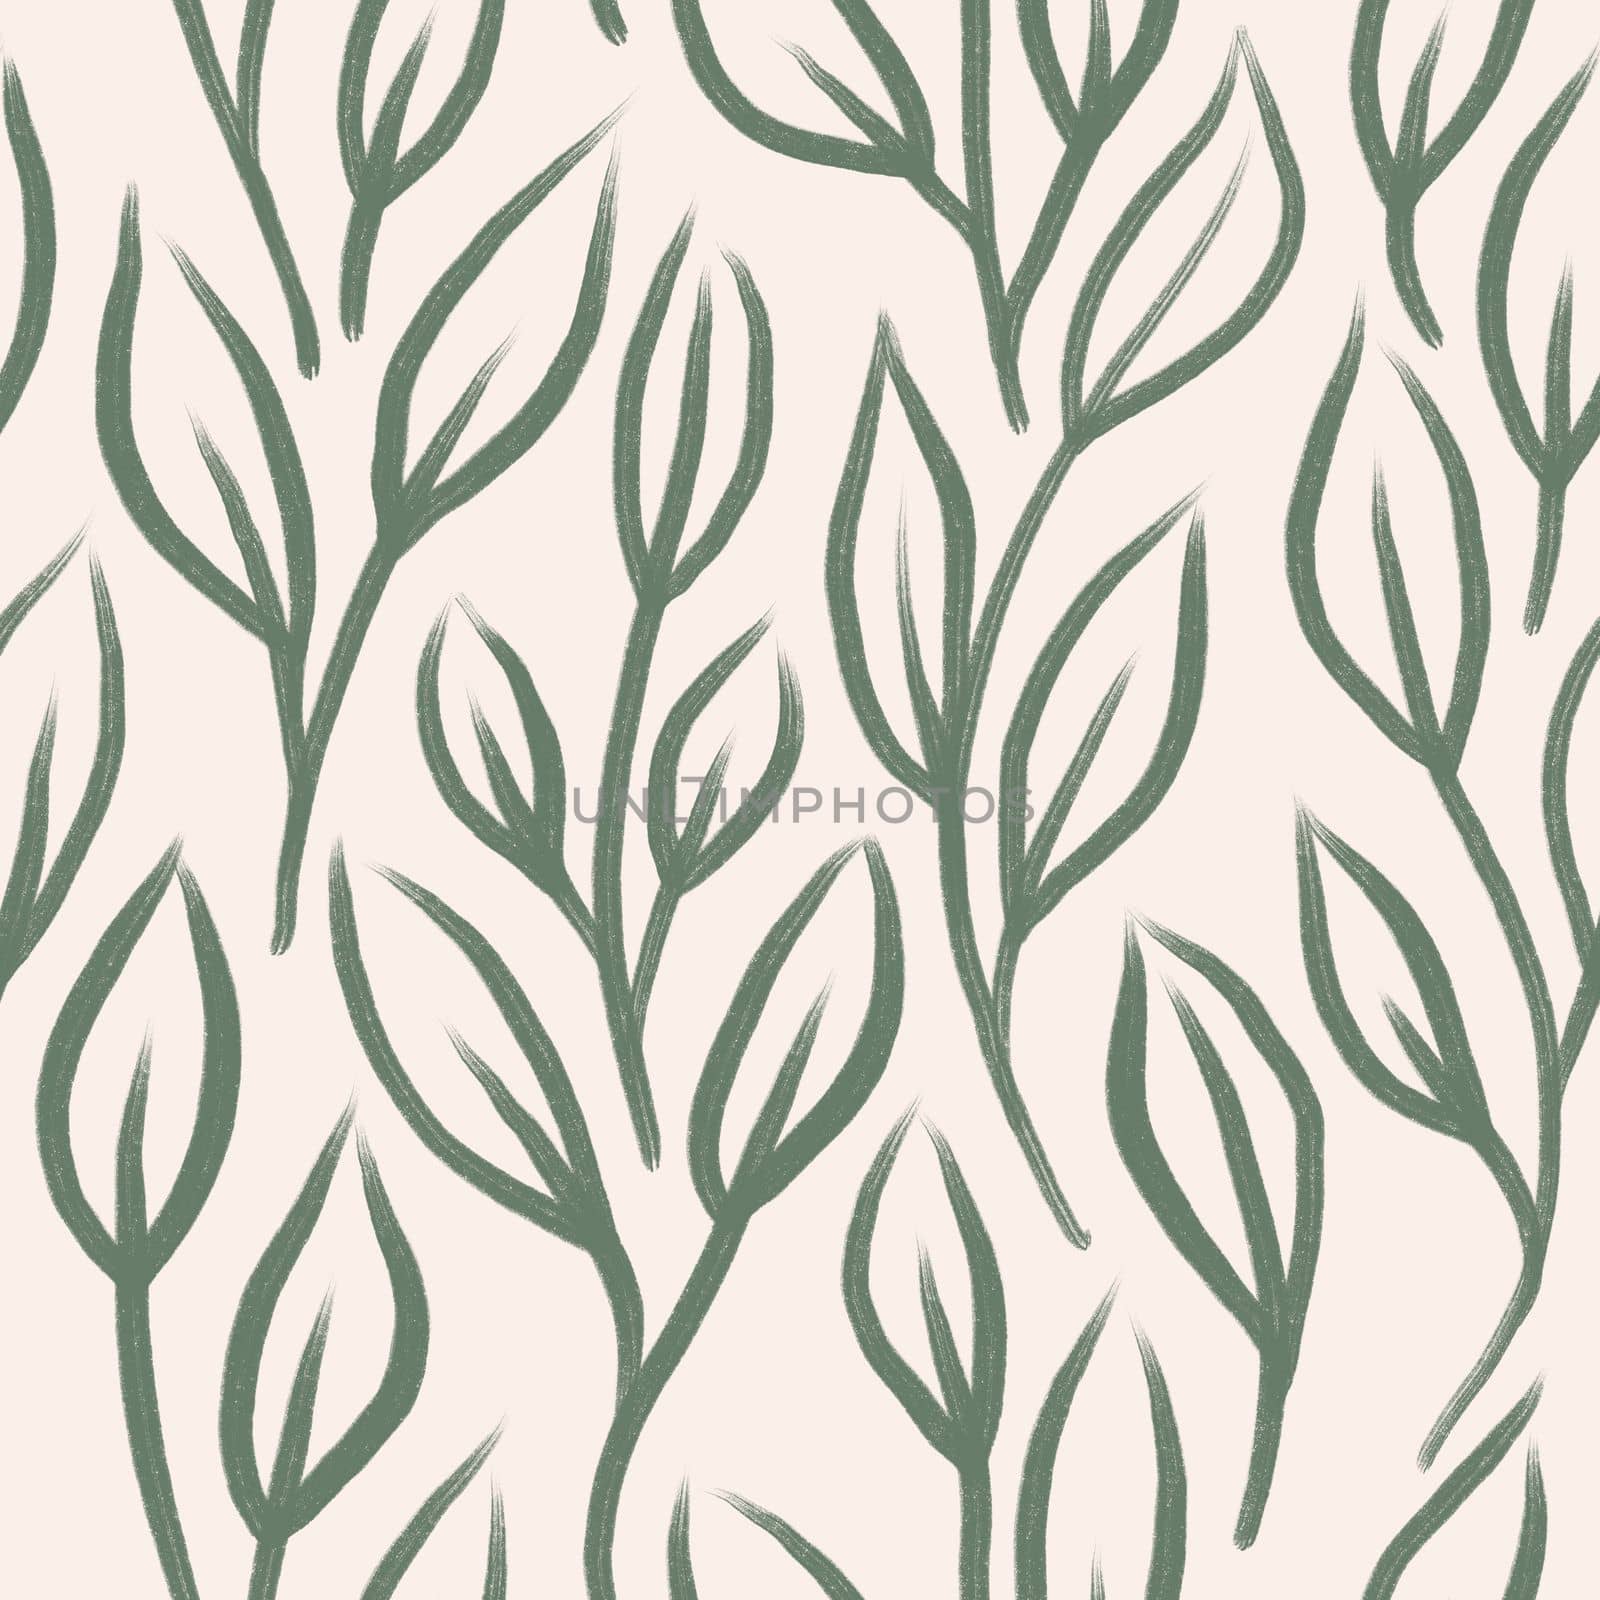 Hand drawn seamless pattern with muted pastel flowers, neutral beige sage green floral design. Boho bohemian trendy loose nature blossom bloom leaves, victorian retro garden print, retro romantic fabric for spring summer foliage